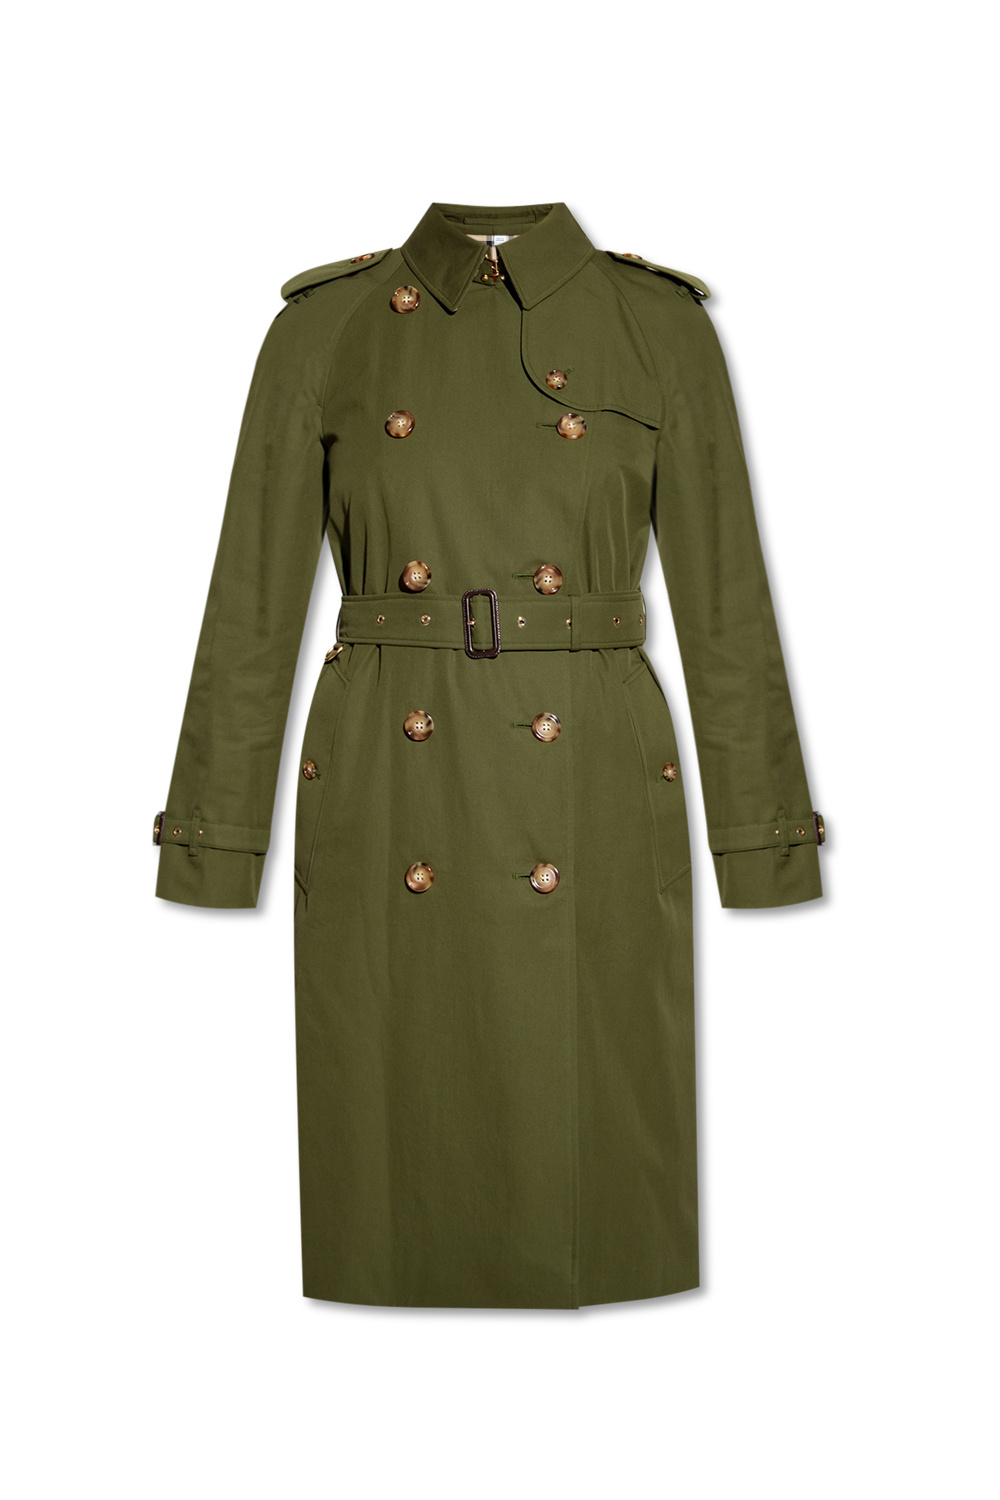 Burberry 'Waterloo' double-breasted trench coat | Women's Clothing | Vitkac